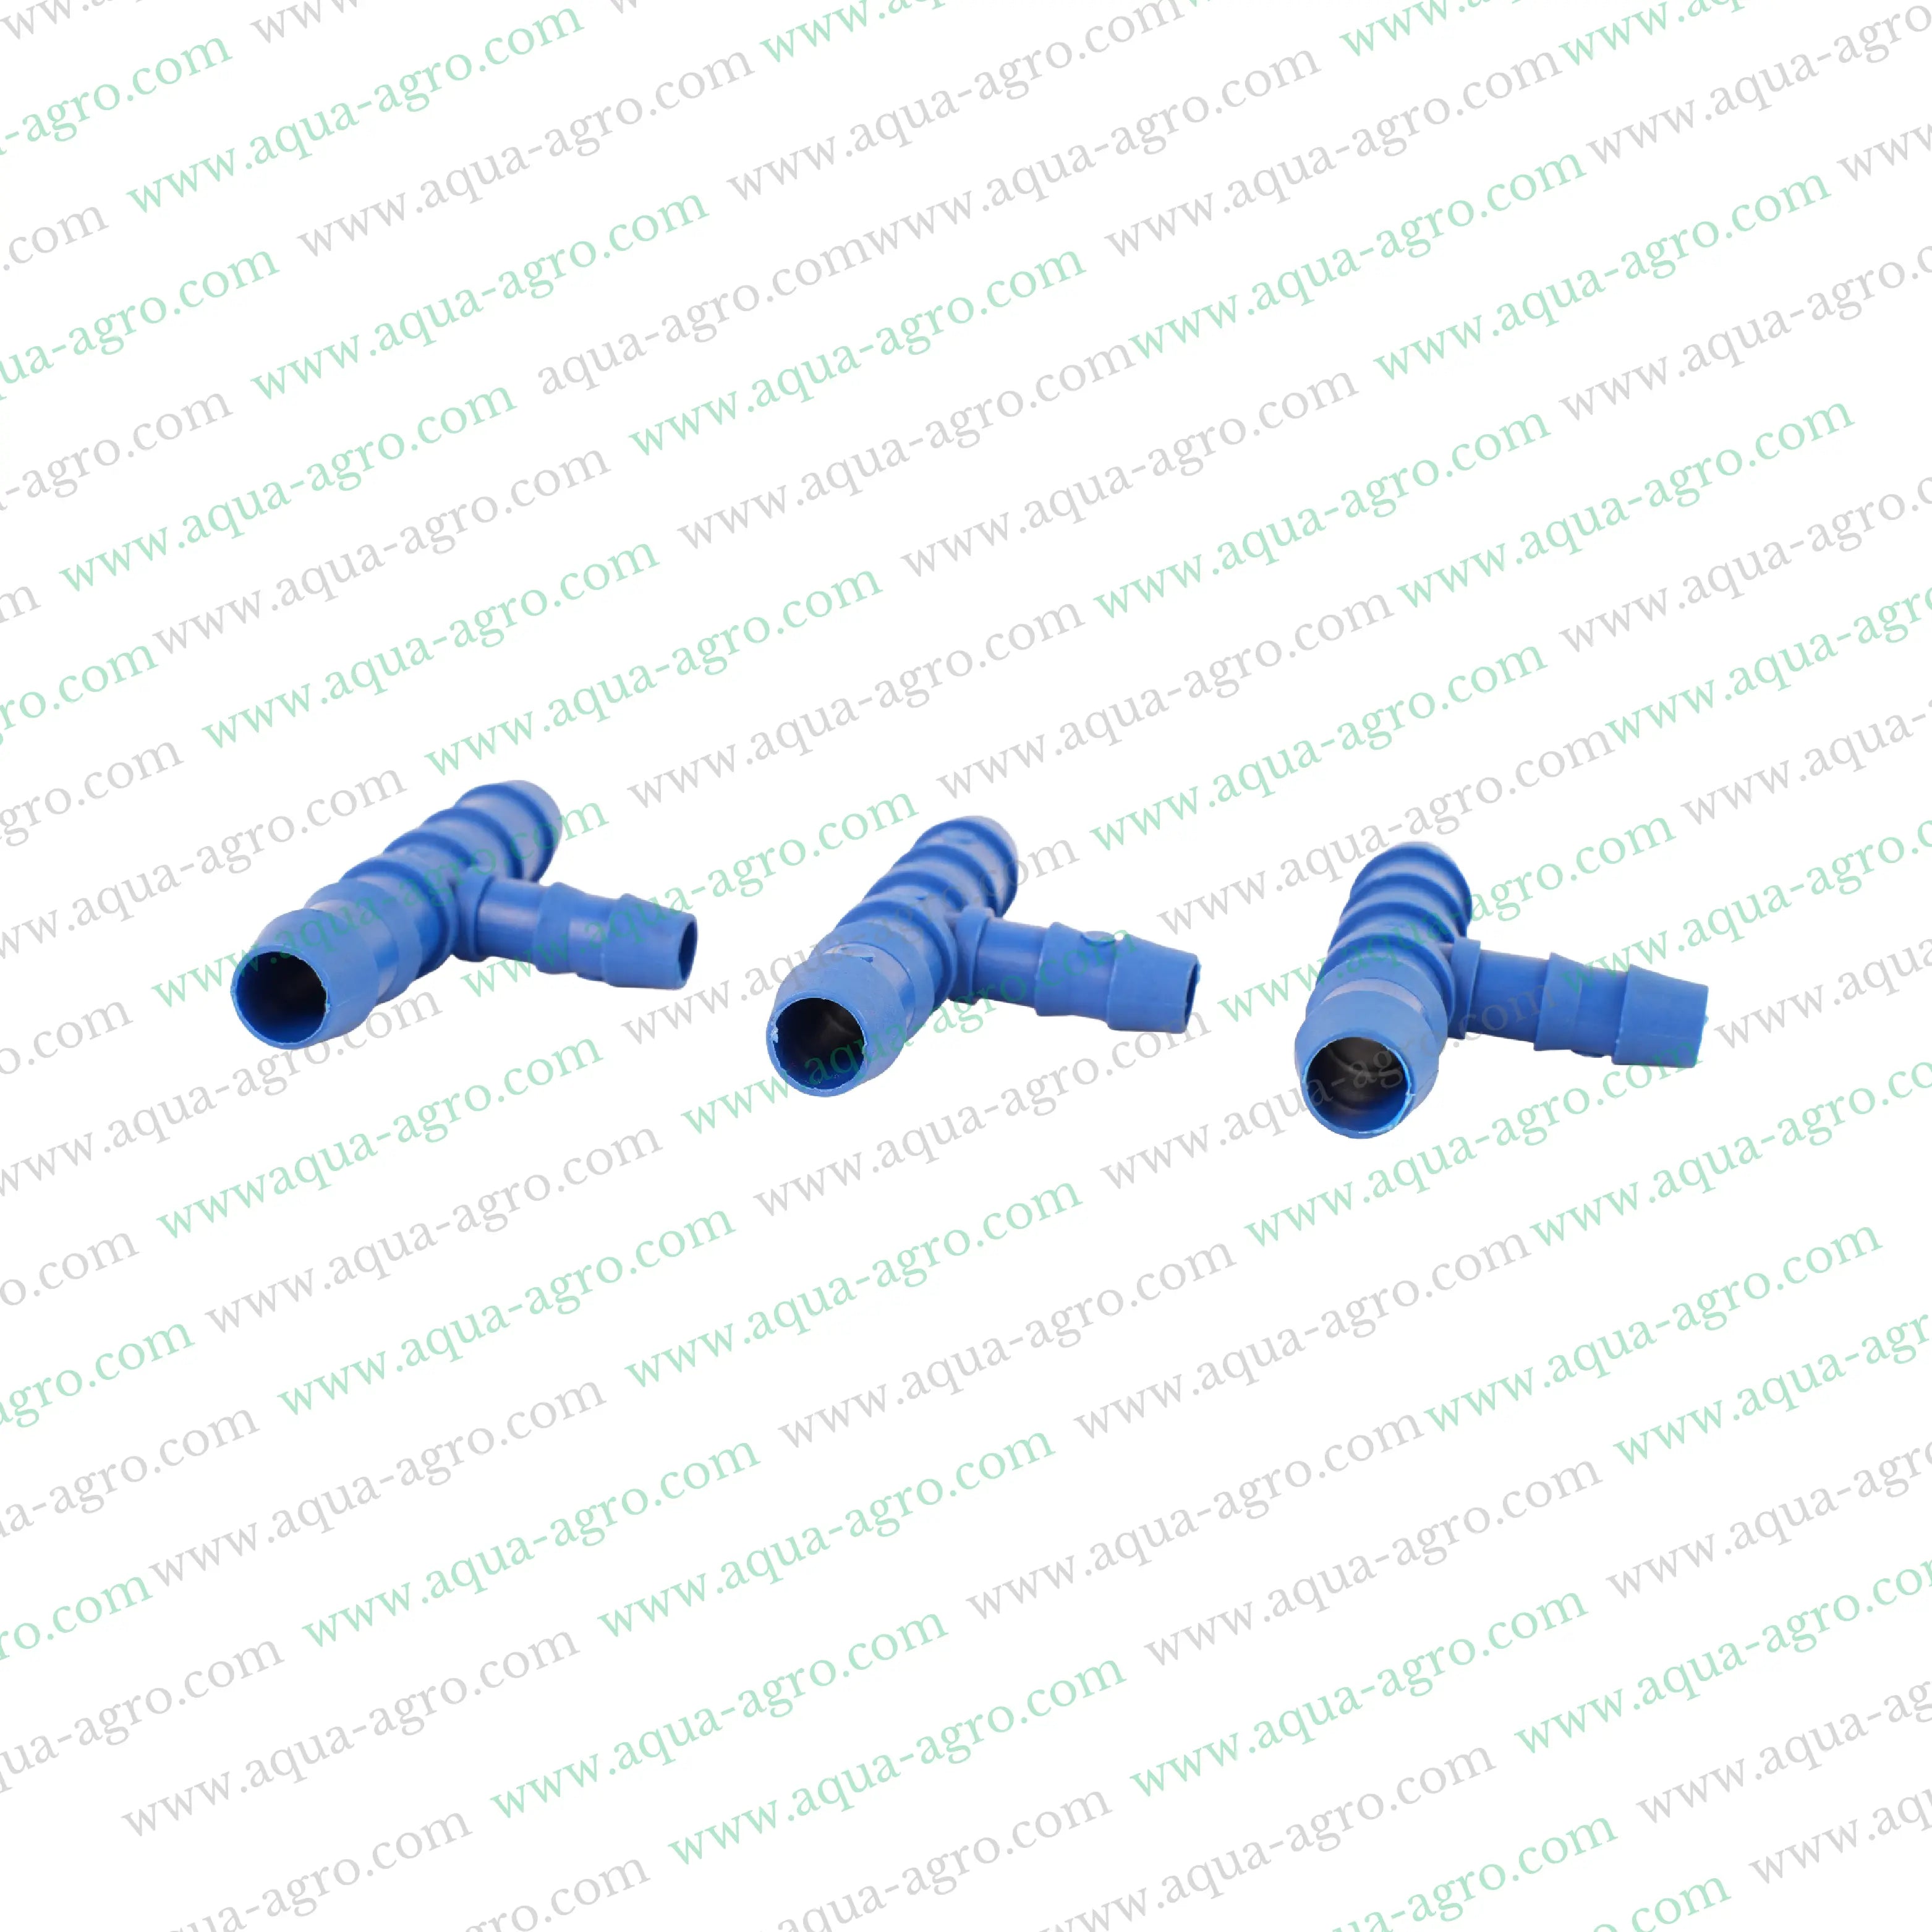 AQUA - AGRO | Drip Fittings And Accessories - Barbed Fittings - Lite - Reducing Tee - 16mm x 12mm x 16mm